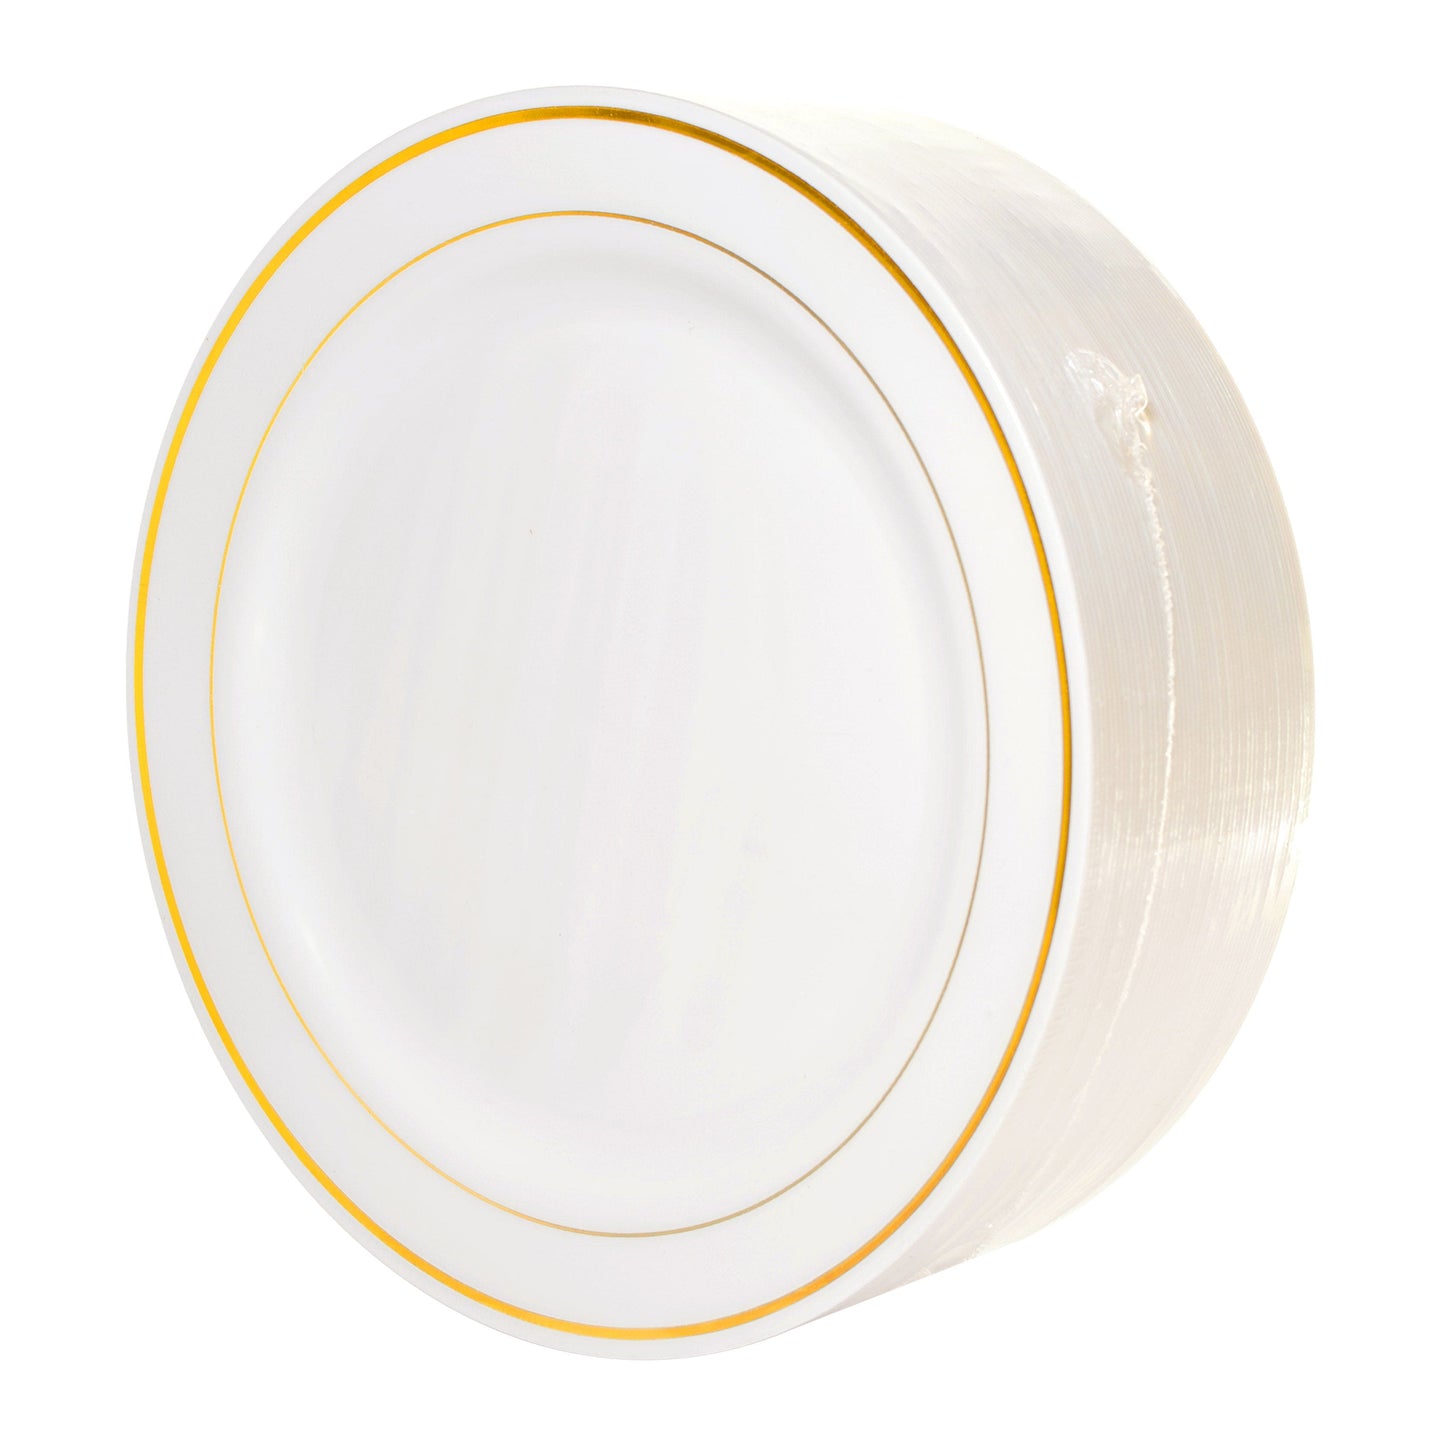 White with Gold Trim 9in Round Plastic Plates 50ct